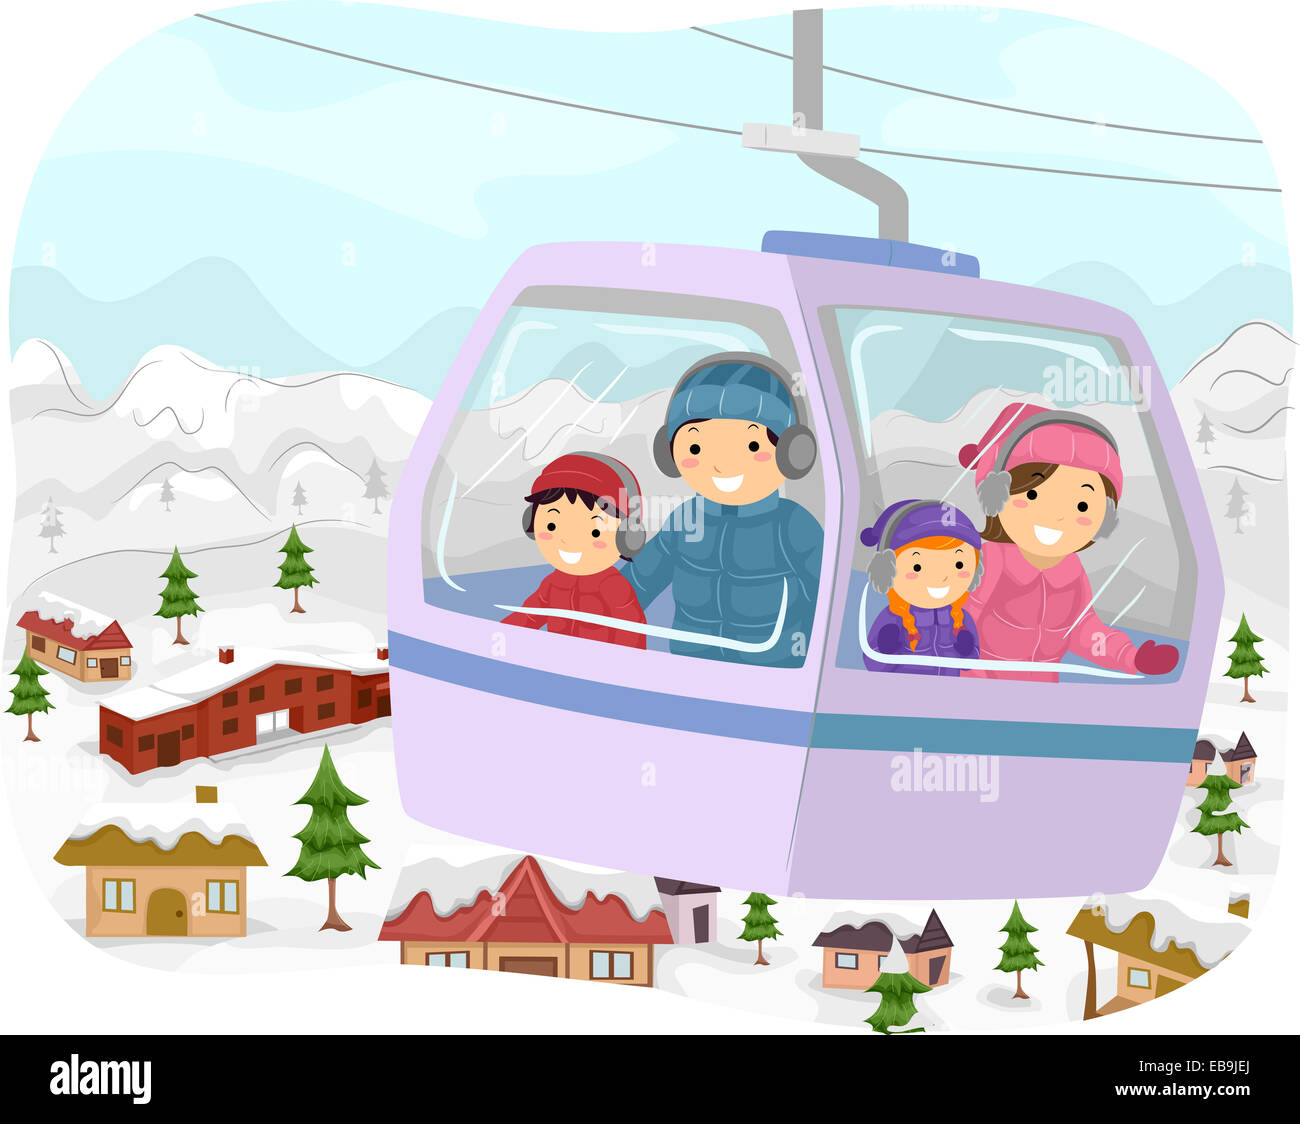 Illustration Featuring a Family in a Cable Car Checking Out the Snowy  Slopes Below Stock Photo - Alamy